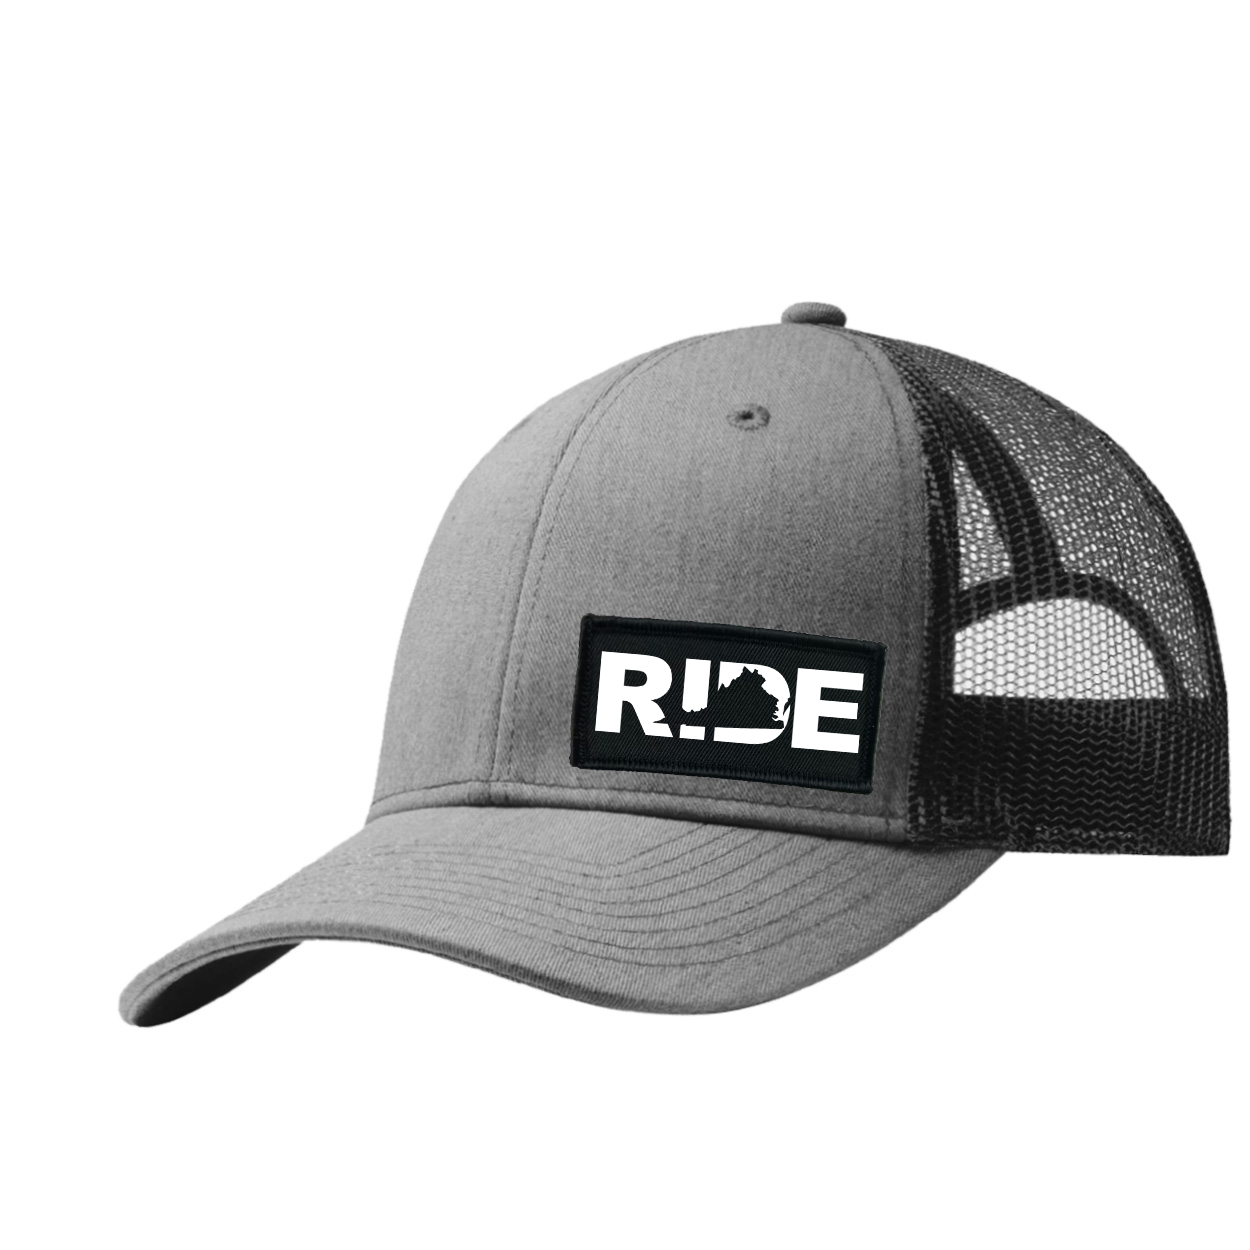 Ride Virginia Night Out Woven Patch Snapback Trucker Hat Heather Gray/Black (White Logo)